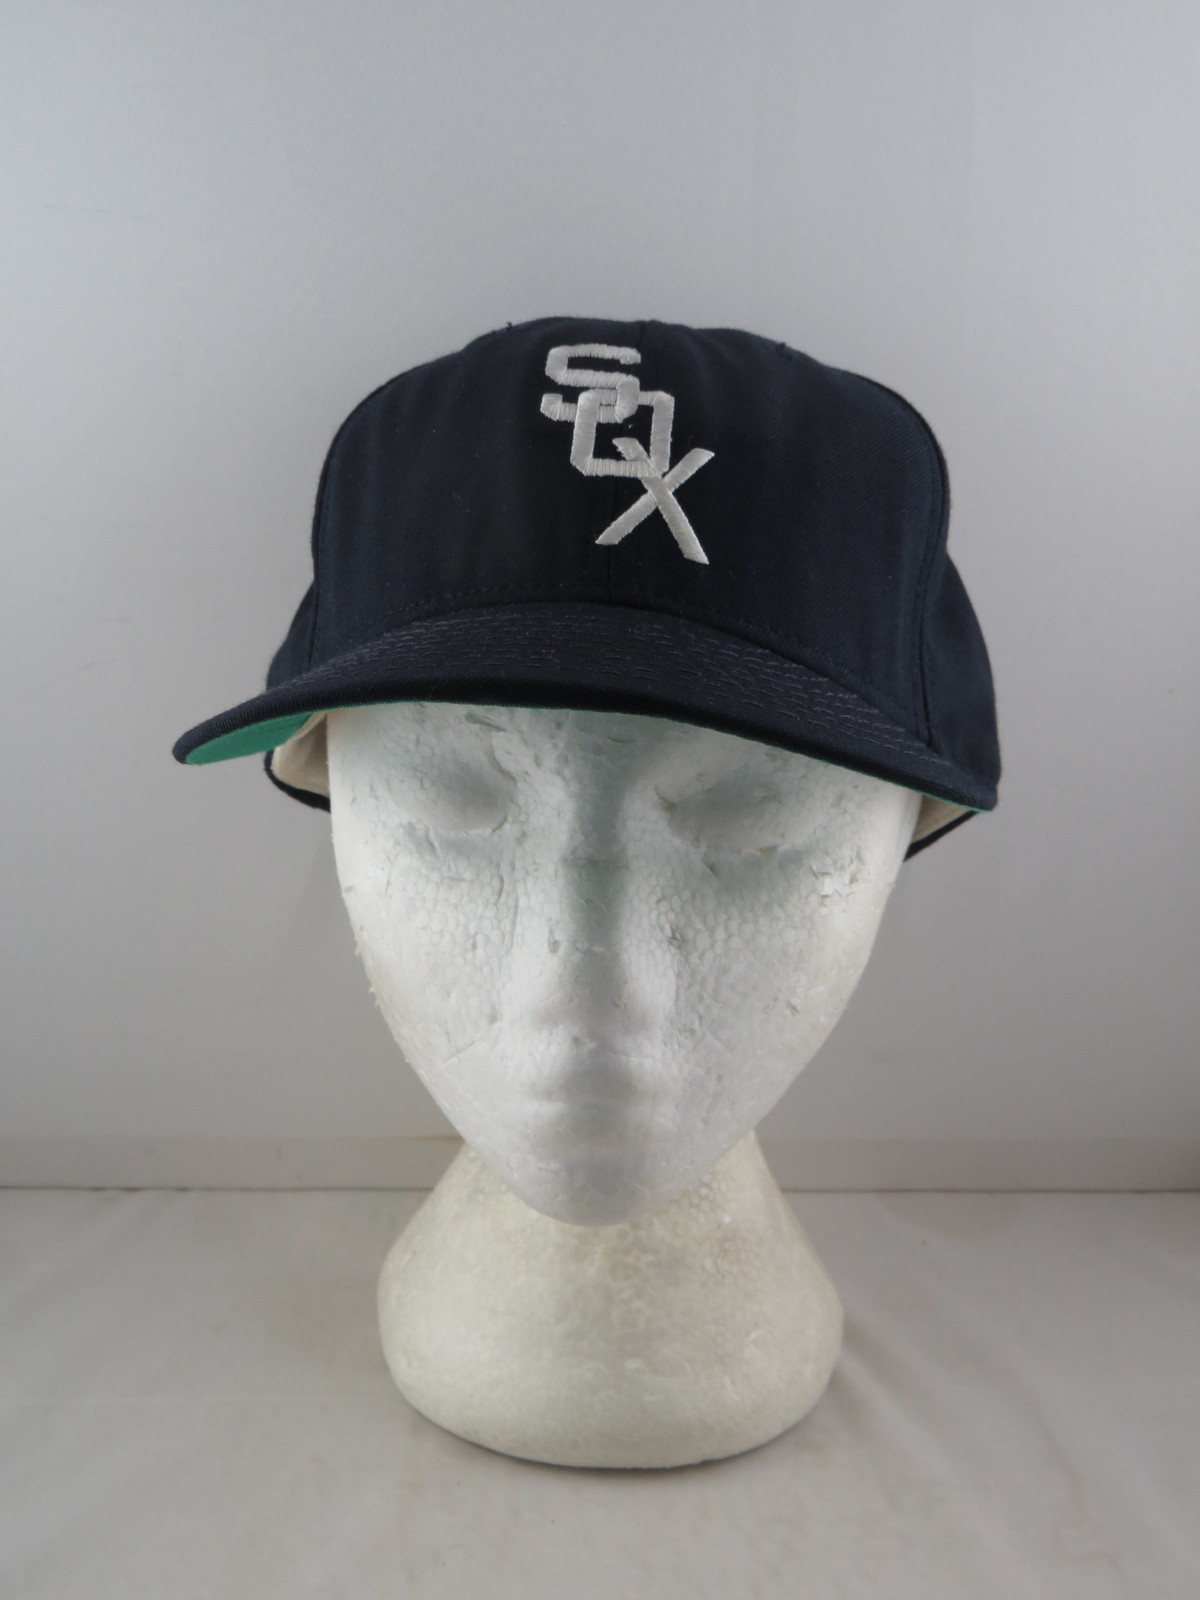 Lids Chicago White Sox Pro Standard Cooperstown Collection Old